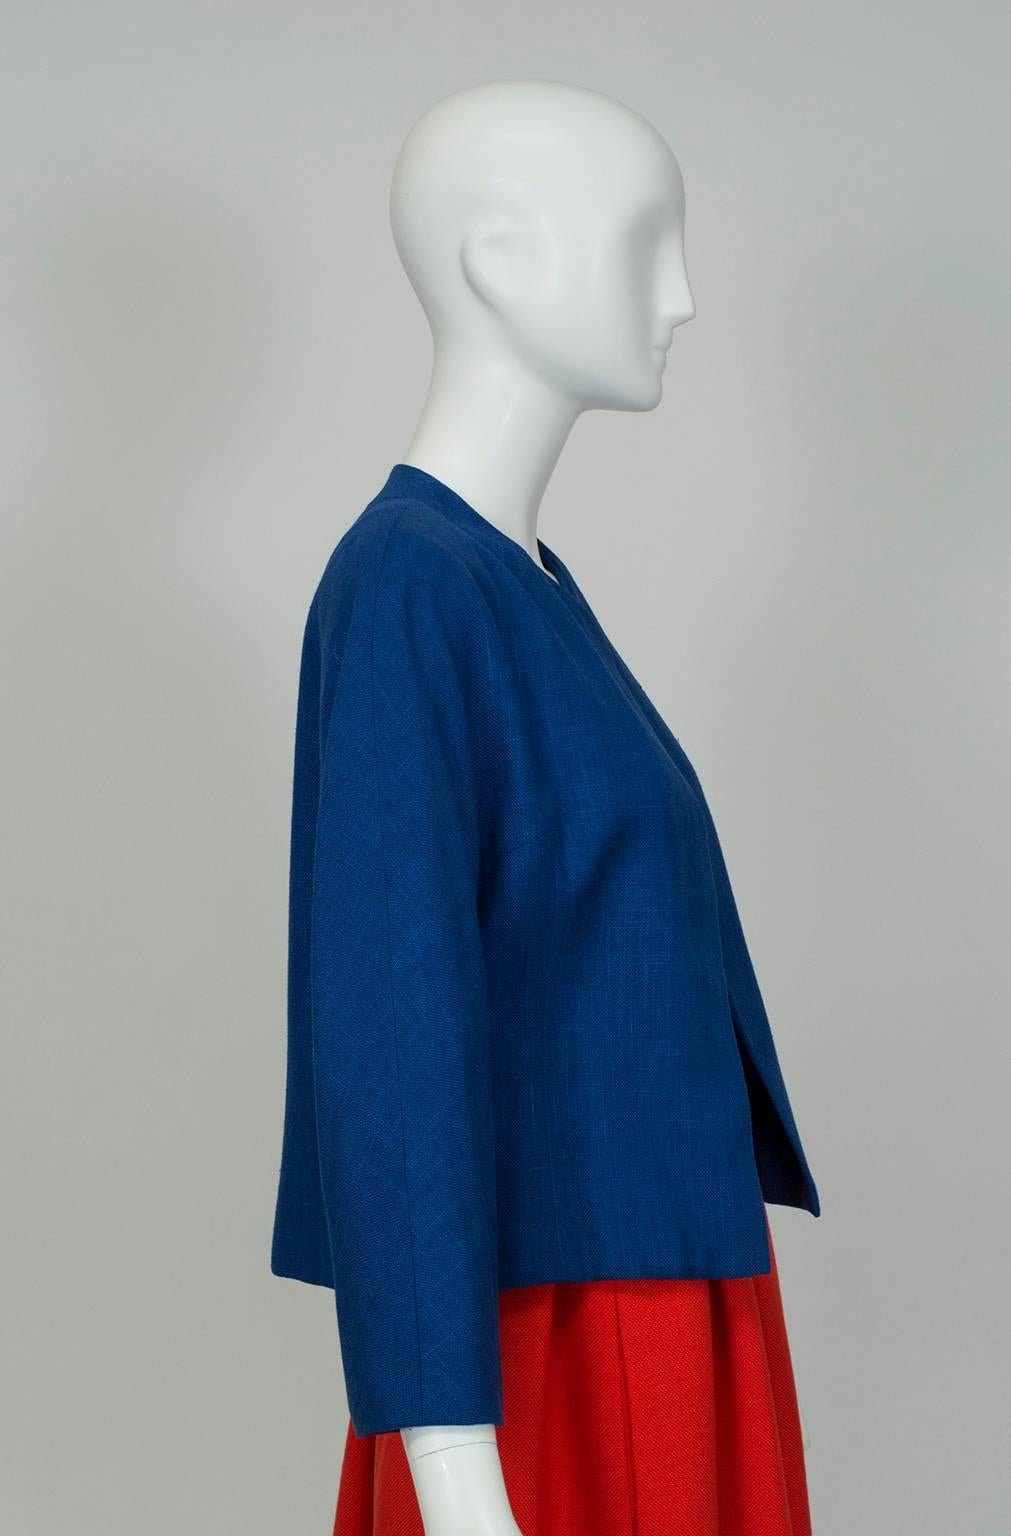 Want to look pulled together in 10 seconds flat? Here’s your answer. This minimal crop jacket has no collar or closures to distract from the rest of your outfit, while the rich marine blue is unusual enough to add punch but still coordinates with